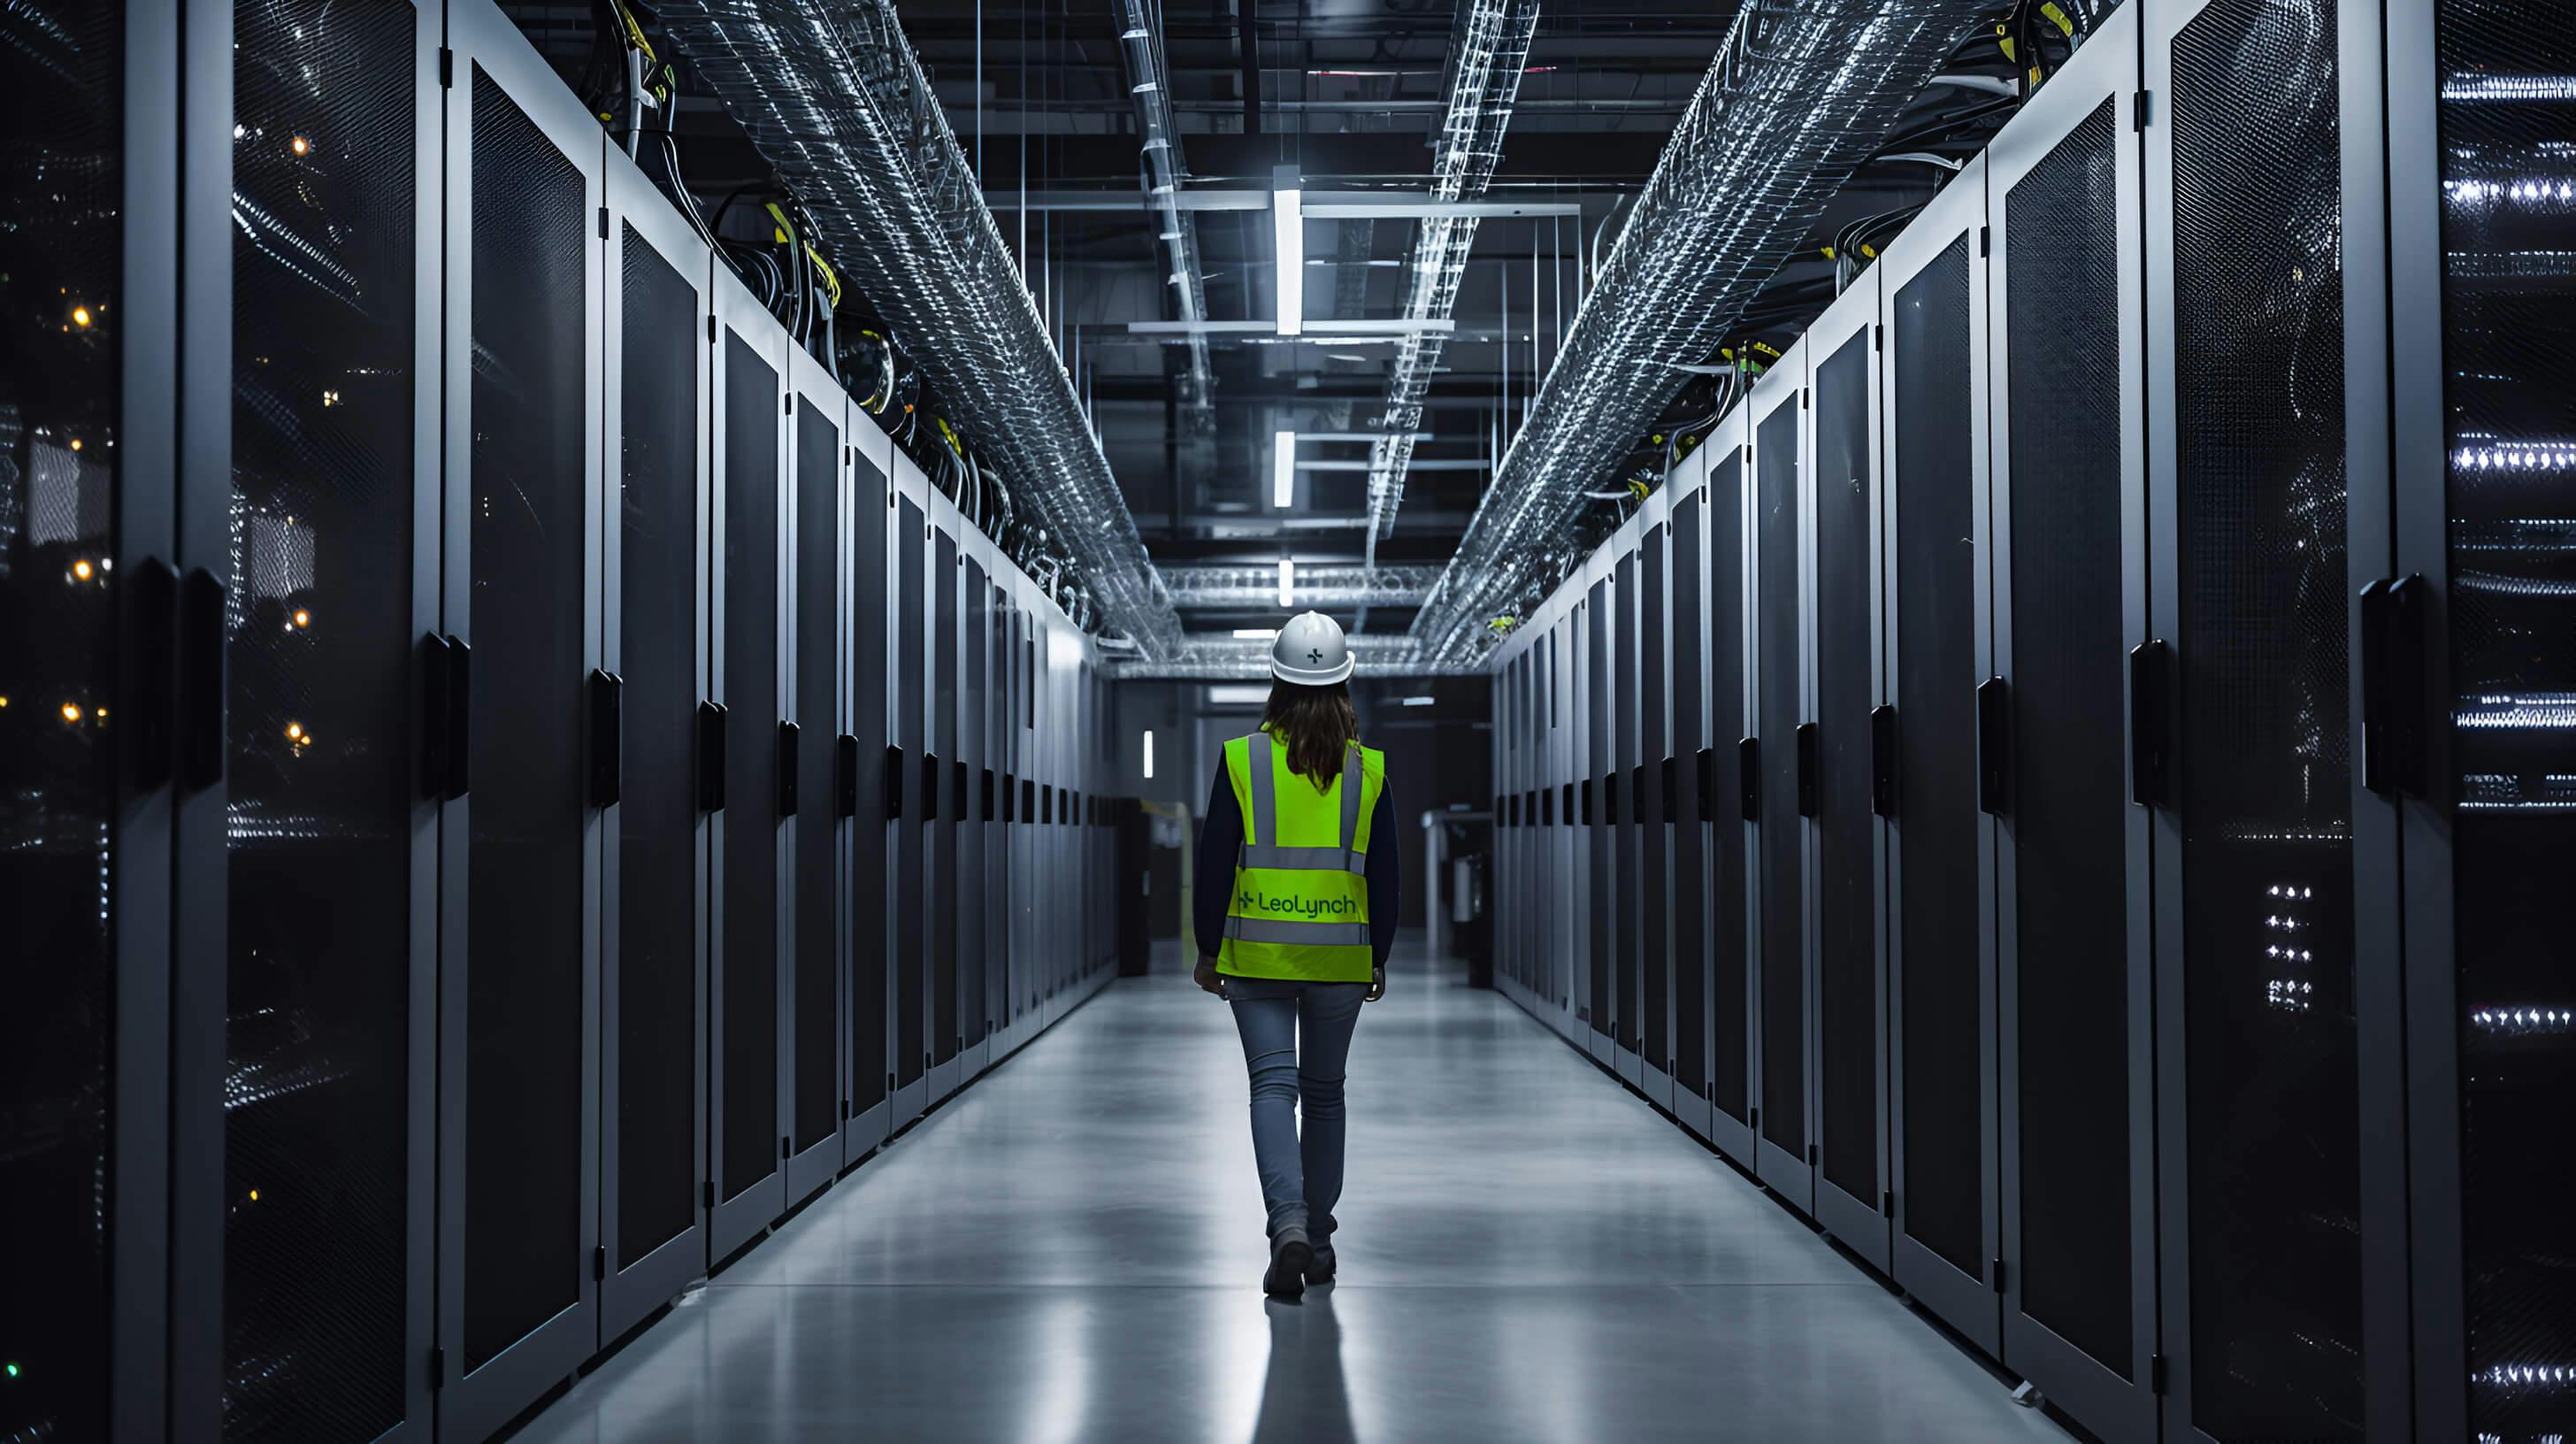 A female engineer walks through a data centre room. She is wearing Leo Lynch-branded PPE